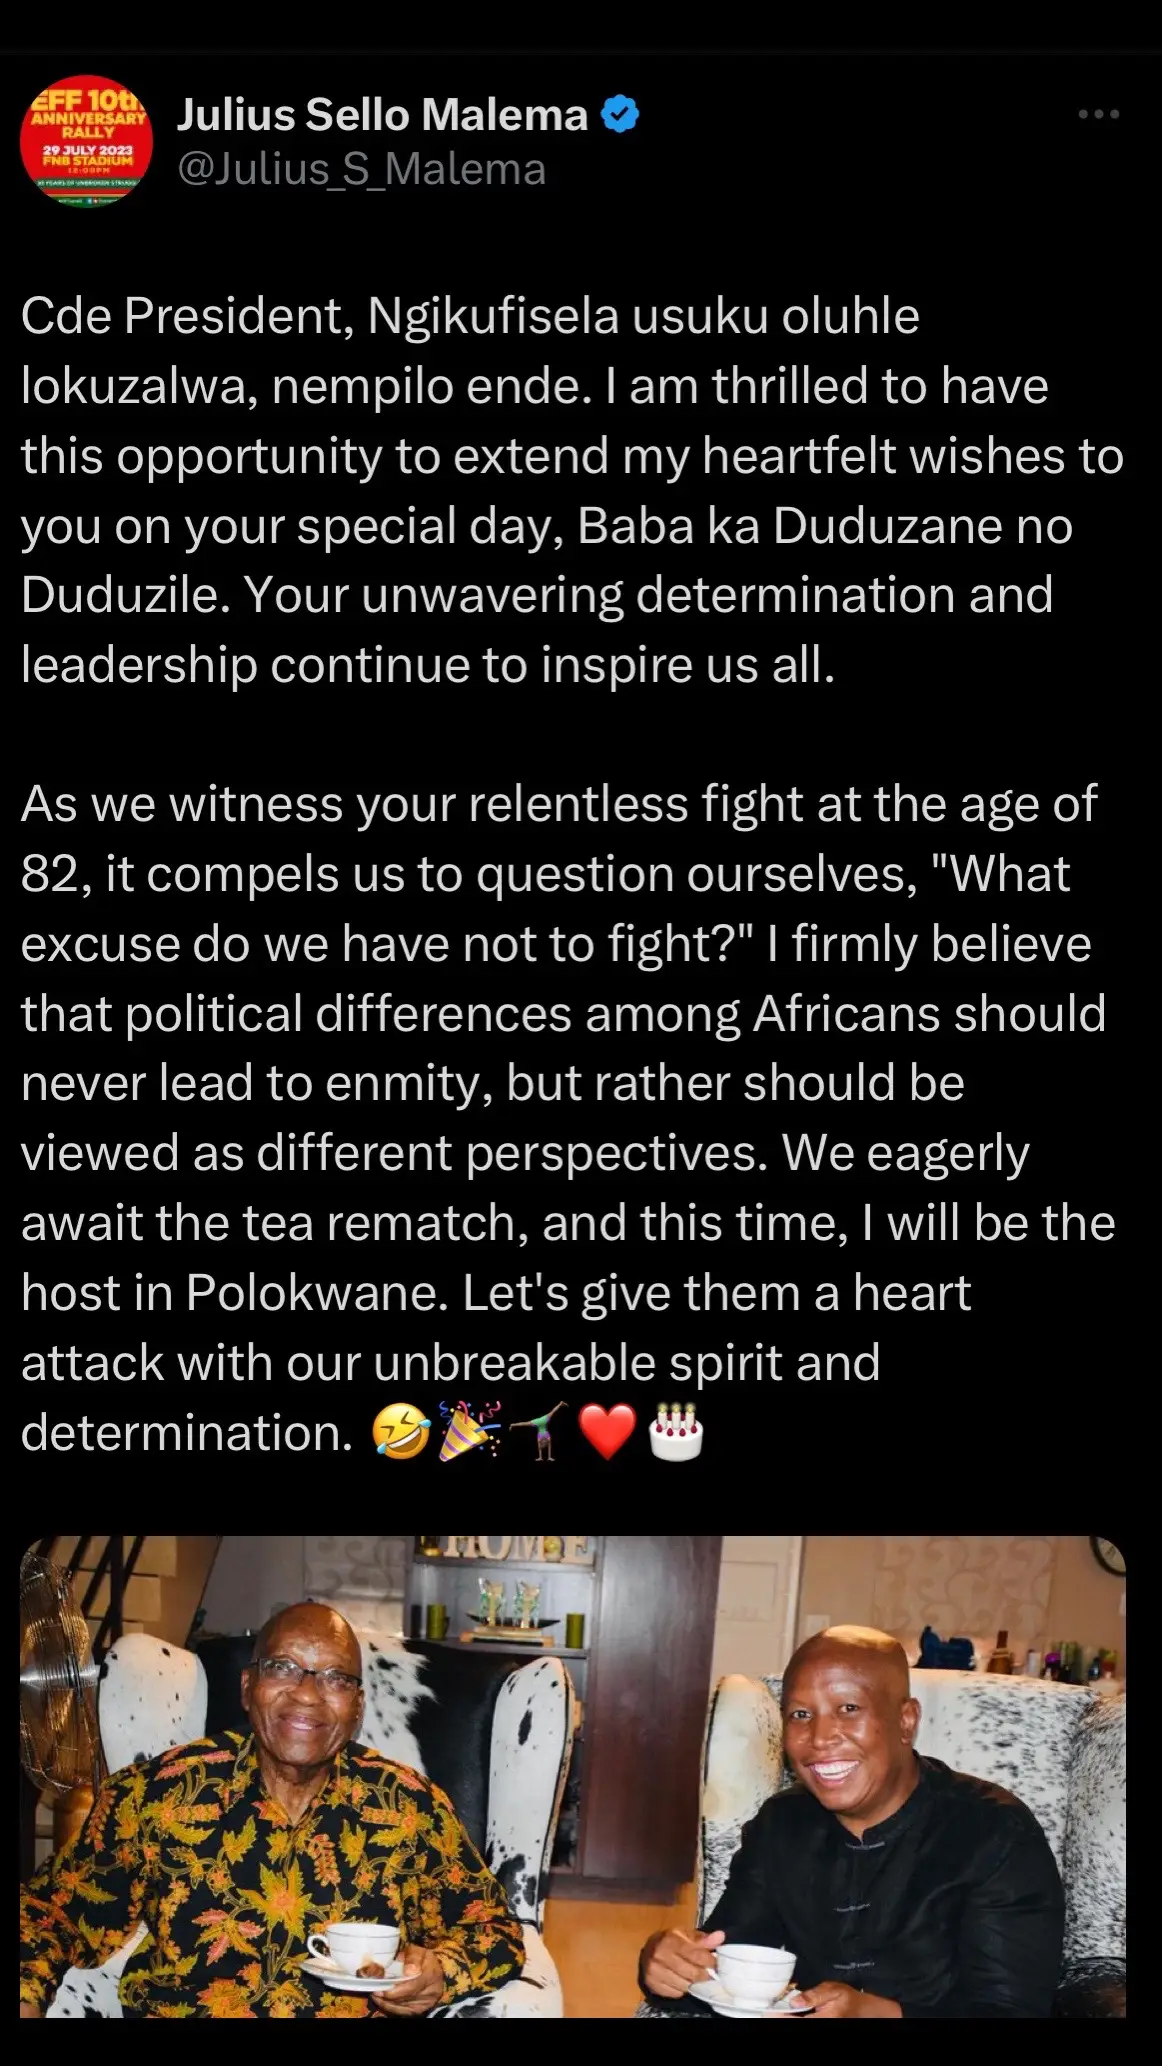 Cde President, Ngikufisela usuku oluhle lokuzalwa, nempilo ende. I am thrilled to have this opportunity to extend my heartfelt wishes to you on your special day, Baba ka Duduzane no Duduzile. Your unwavering determination and leadership continue to inspire us all.  As we witness your relentless fight at the age of 82, it compels us to question ourselves, 